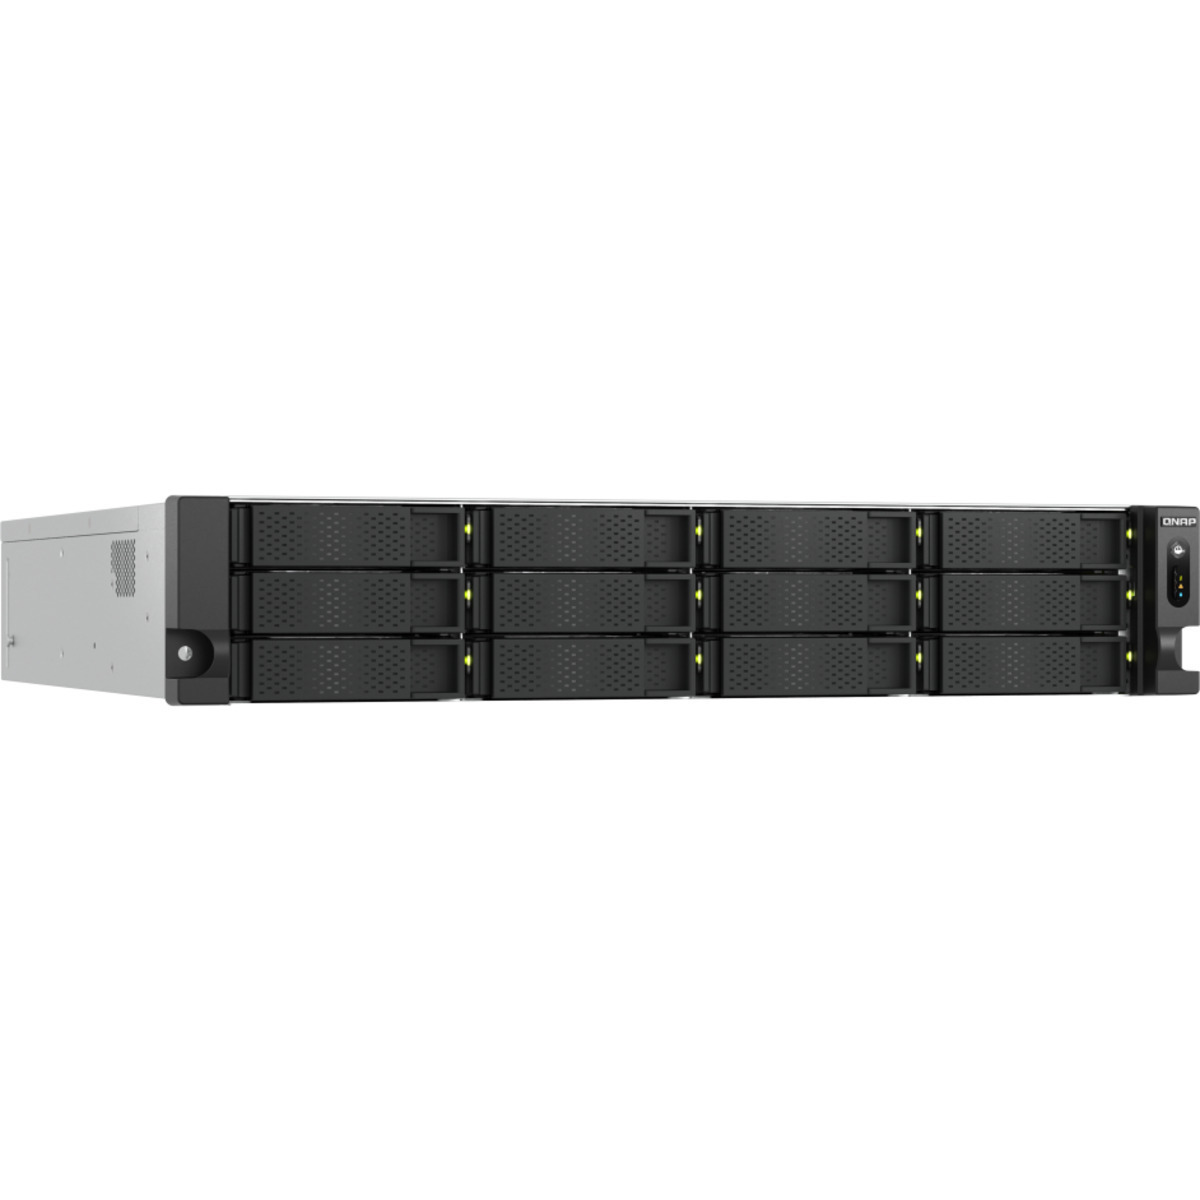 QNAP TS-h1277AXU-RP QUTS hero Ryzen 7 24tb 12-Bay RackMount Large Business / Enterprise NAS - Network Attached Storage Device 12x2tb Crucial MX500 CT2000MX500SSD1 2.5 560/510MB/s SATA 6Gb/s SSD CONSUMER Class Drives Installed - Burn-In Tested TS-h1277AXU-RP QUTS hero Ryzen 7